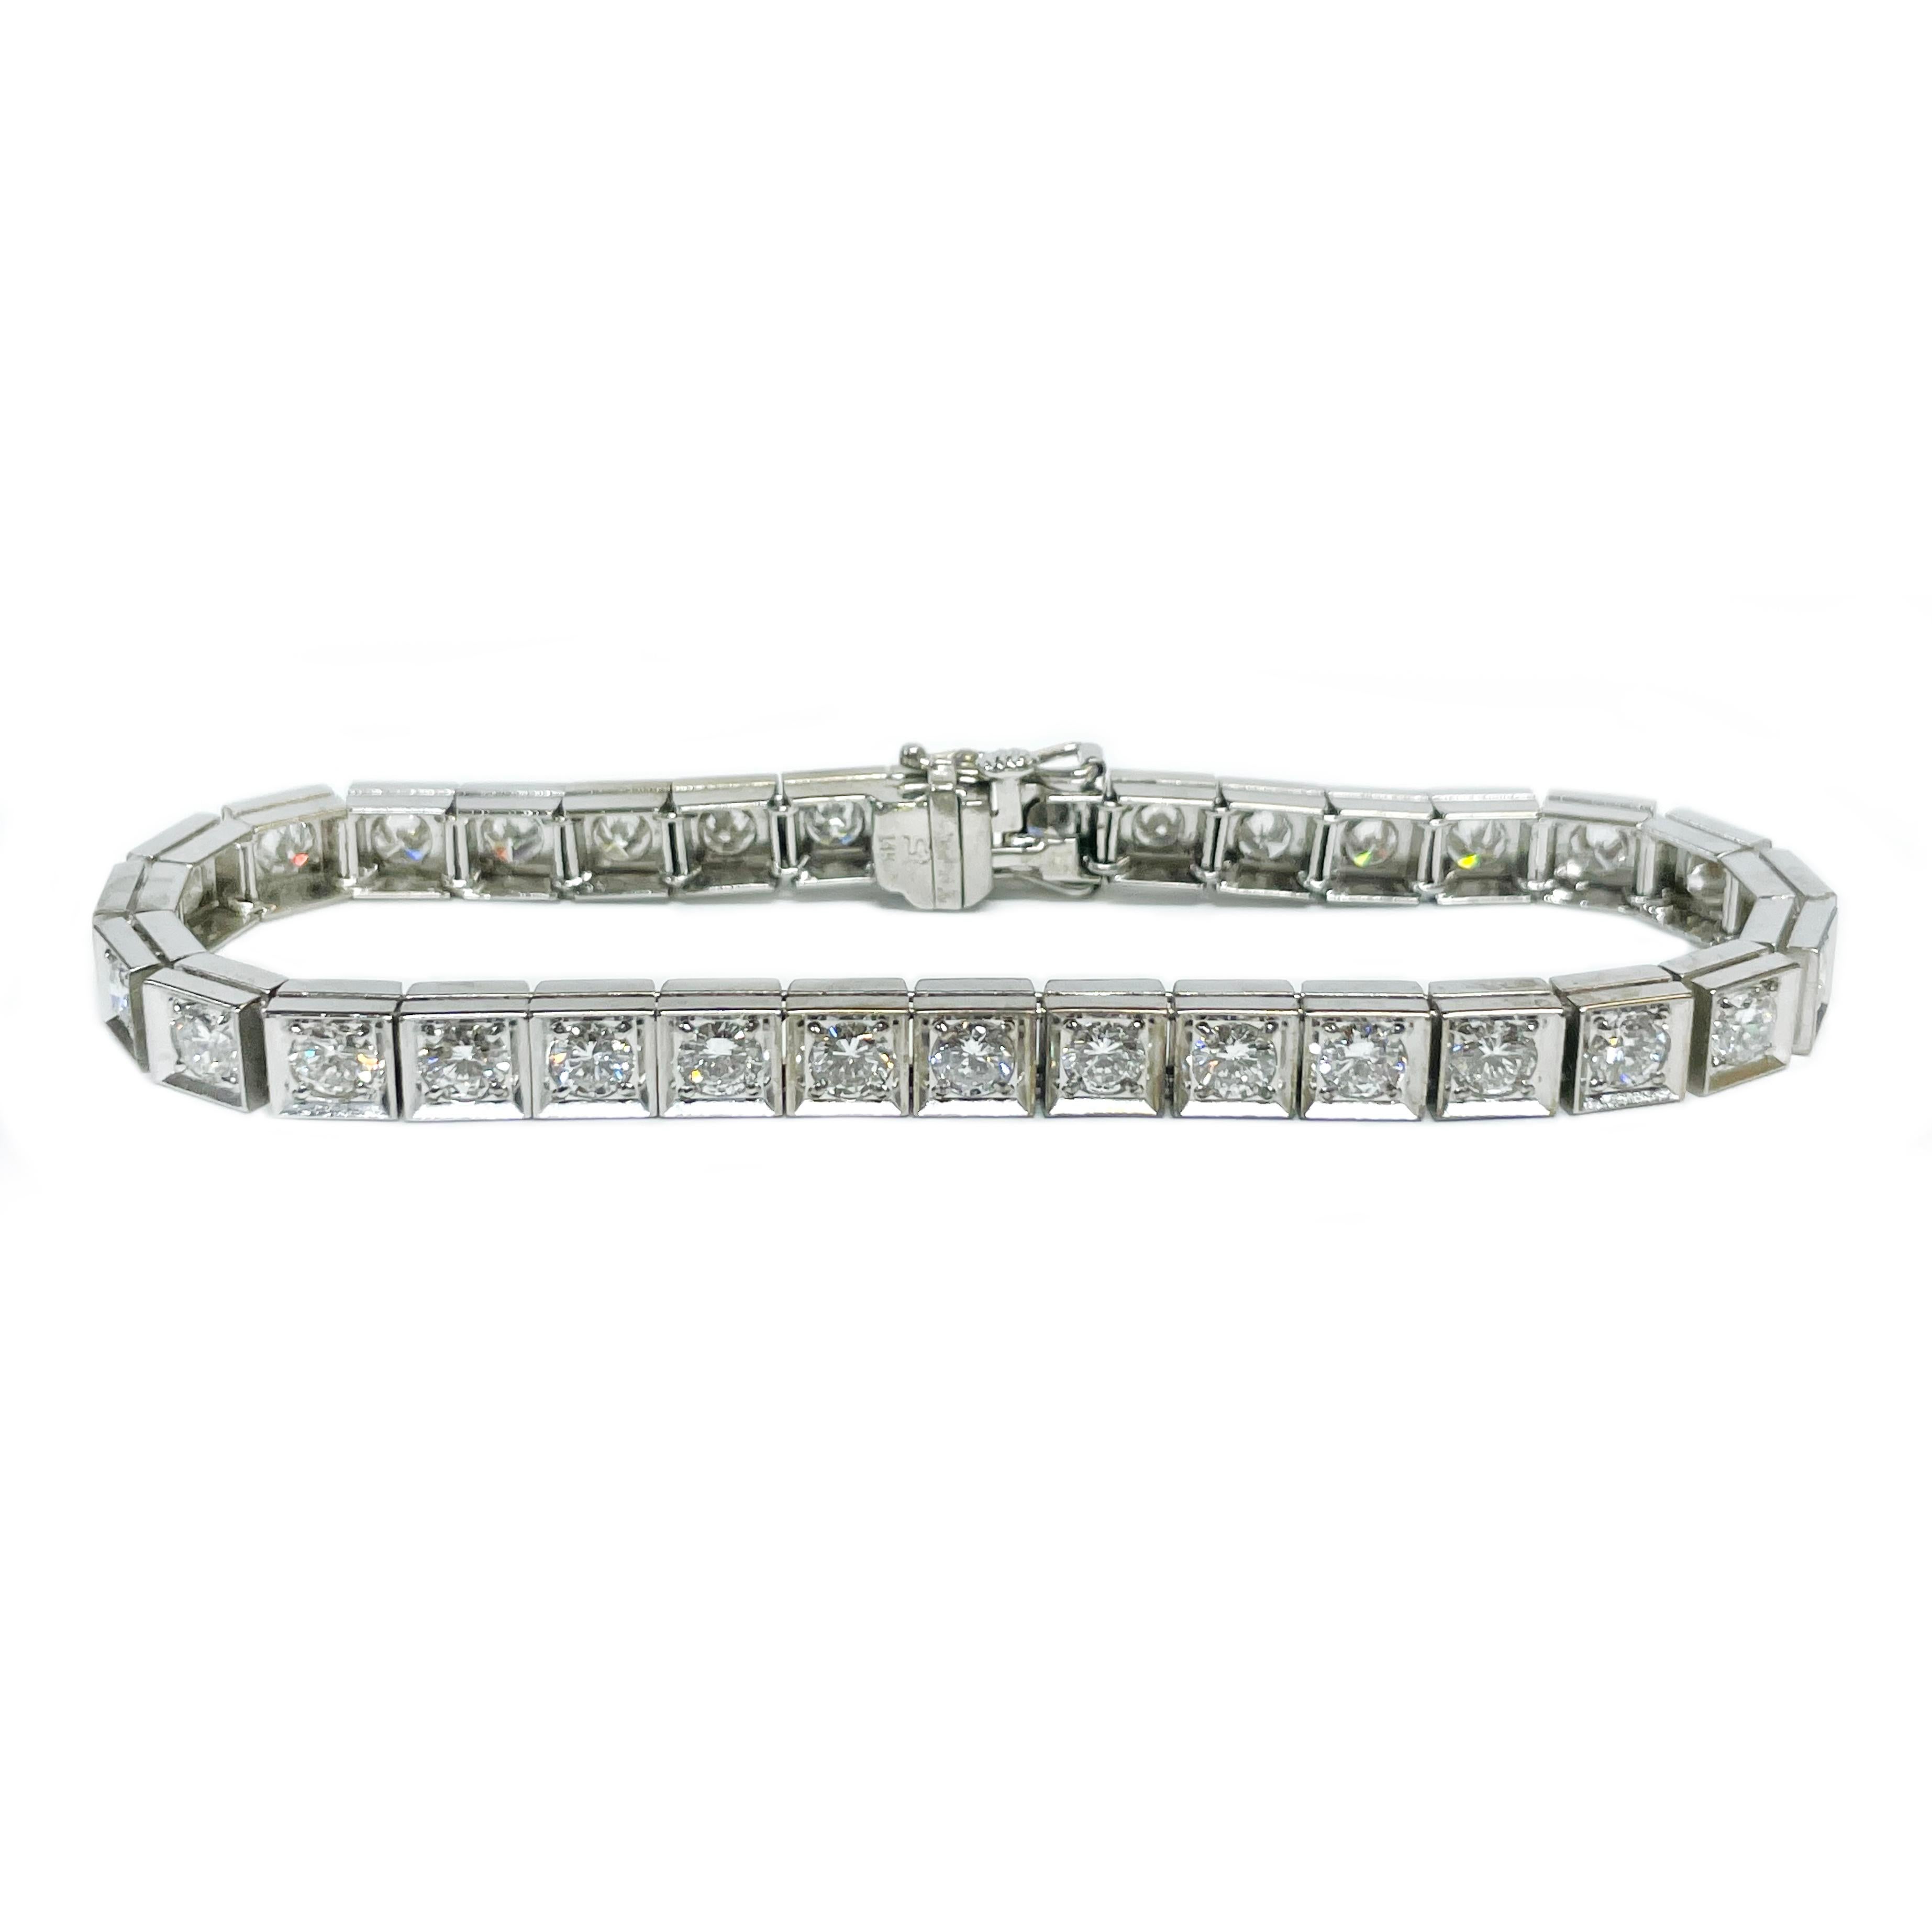 14 Karat White Gold Diamond Tennis Bracelet. The stunning bracelet features thirty-two round bead-set diamonds. The diamonds measure 3.6mm - 3.7mm and have a total carat weight of 5.5ctw. The diamonds are SI in clarity (G.I.A.) and G-H in color